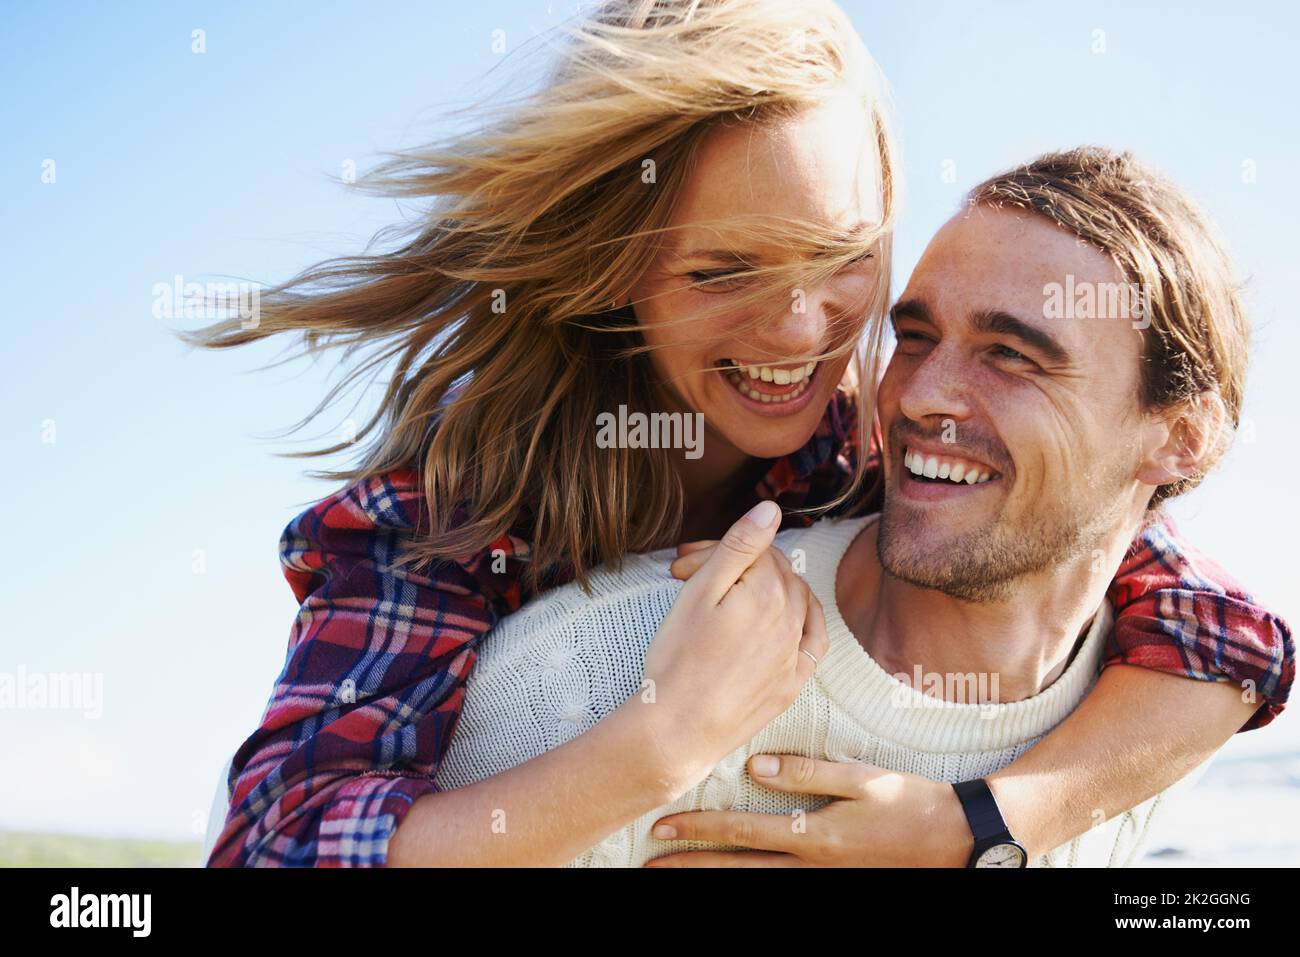 The joy of being in love. Shot of an affectionate young couple spending time together outdoors. Stock Photo